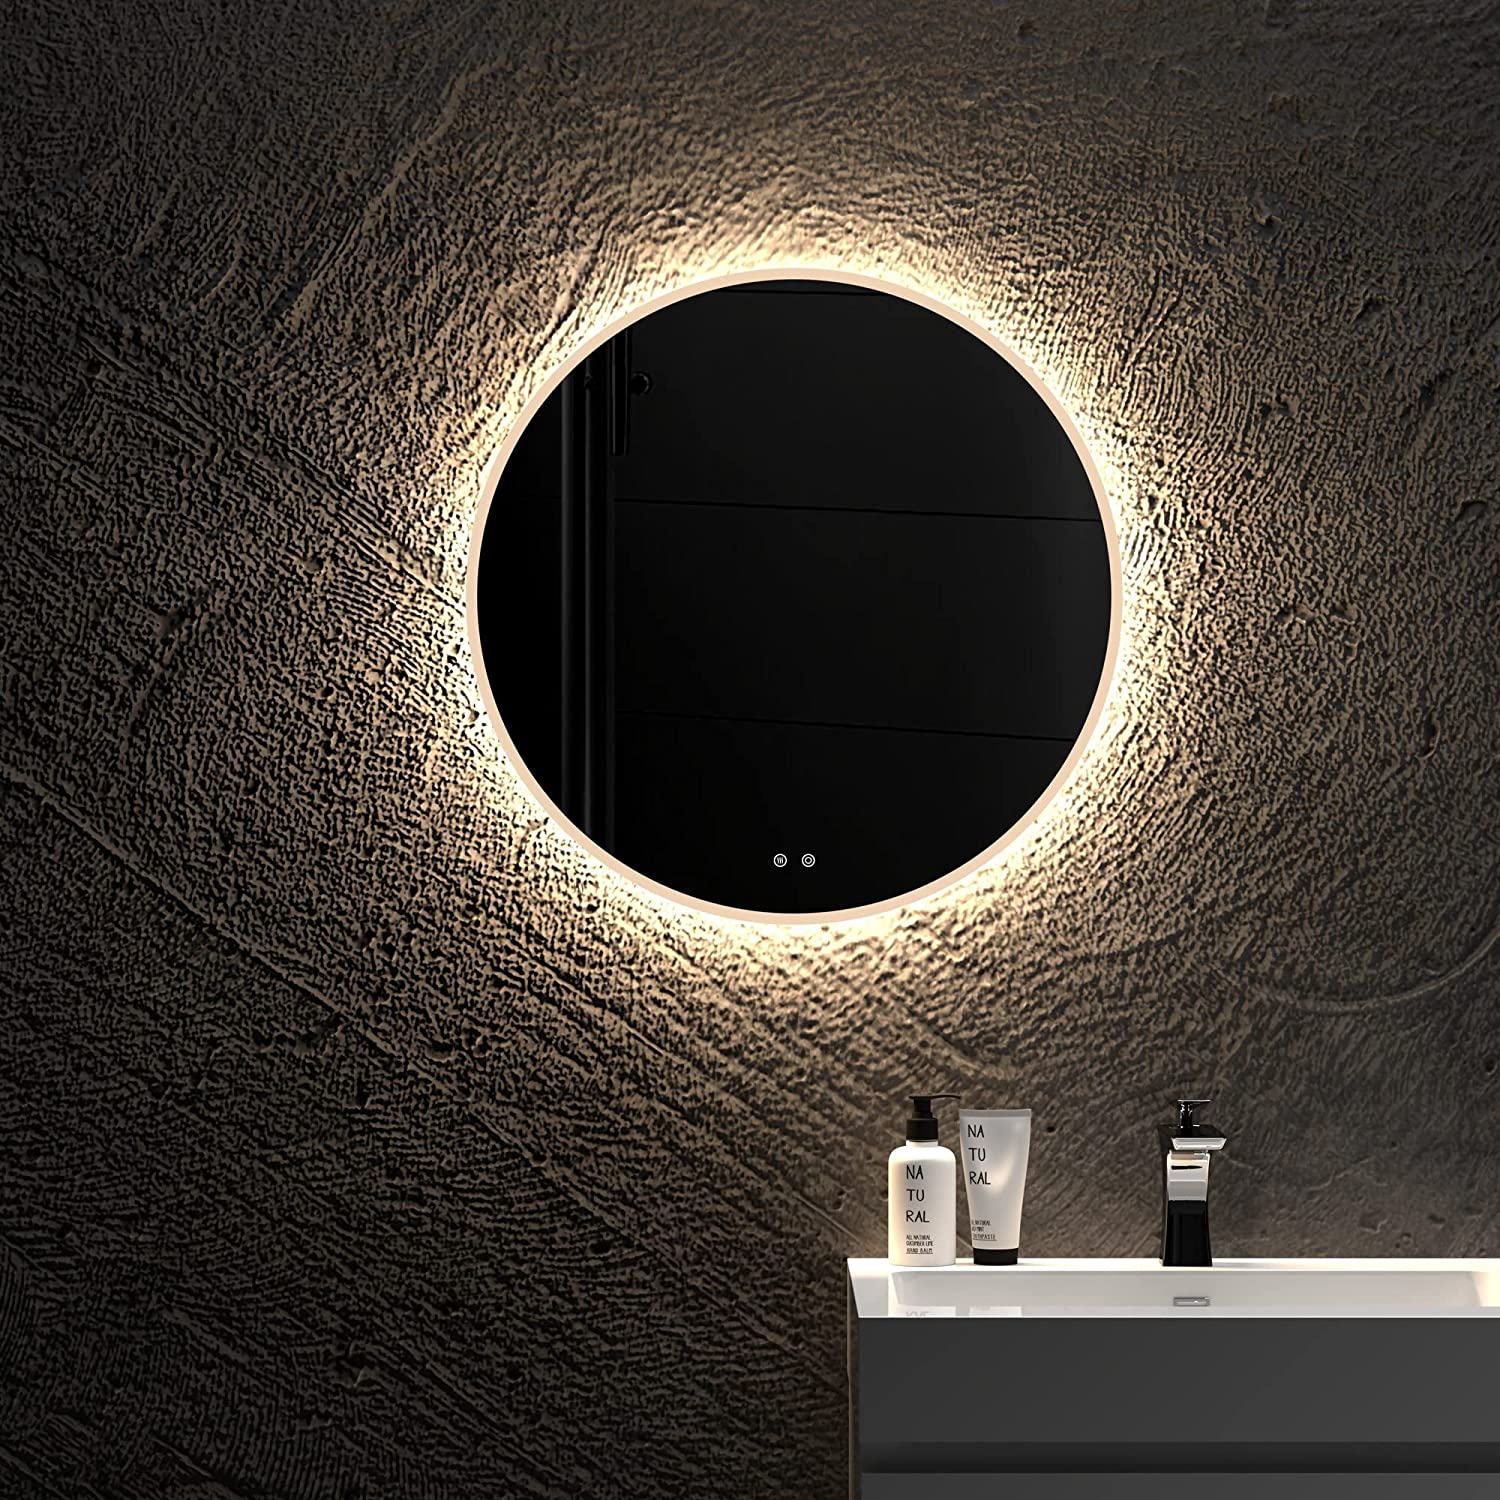 JimsMaison Round Led Bathroom Mirror with Lights, Anti-Fog Front and Backlit Mirror for Bathroom, 3 Colors Dimmable Bathroom Led Mirror, Wall Mount Lighted Vanity Makeup Mirror